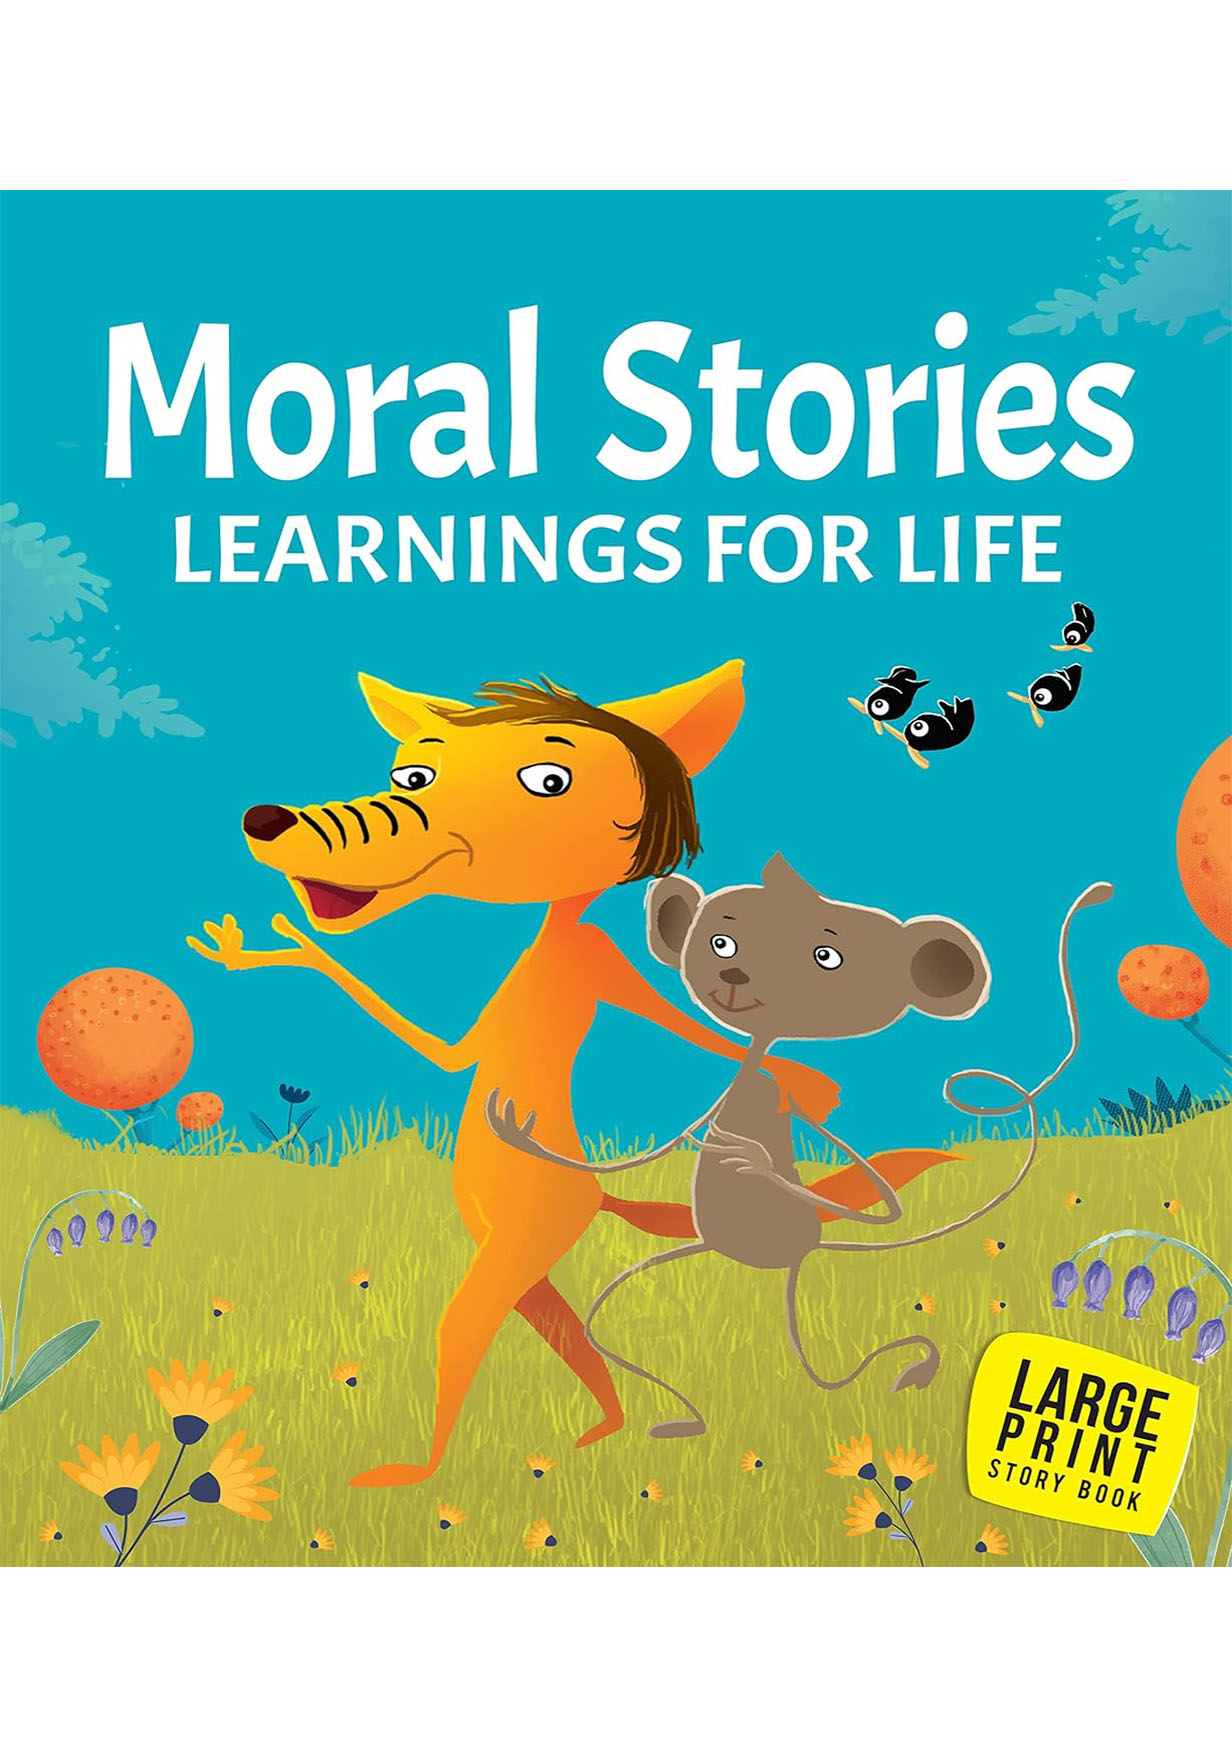 Moral Stories Learnings For Life (Large Print Story Book) (পেপারব্যাক)